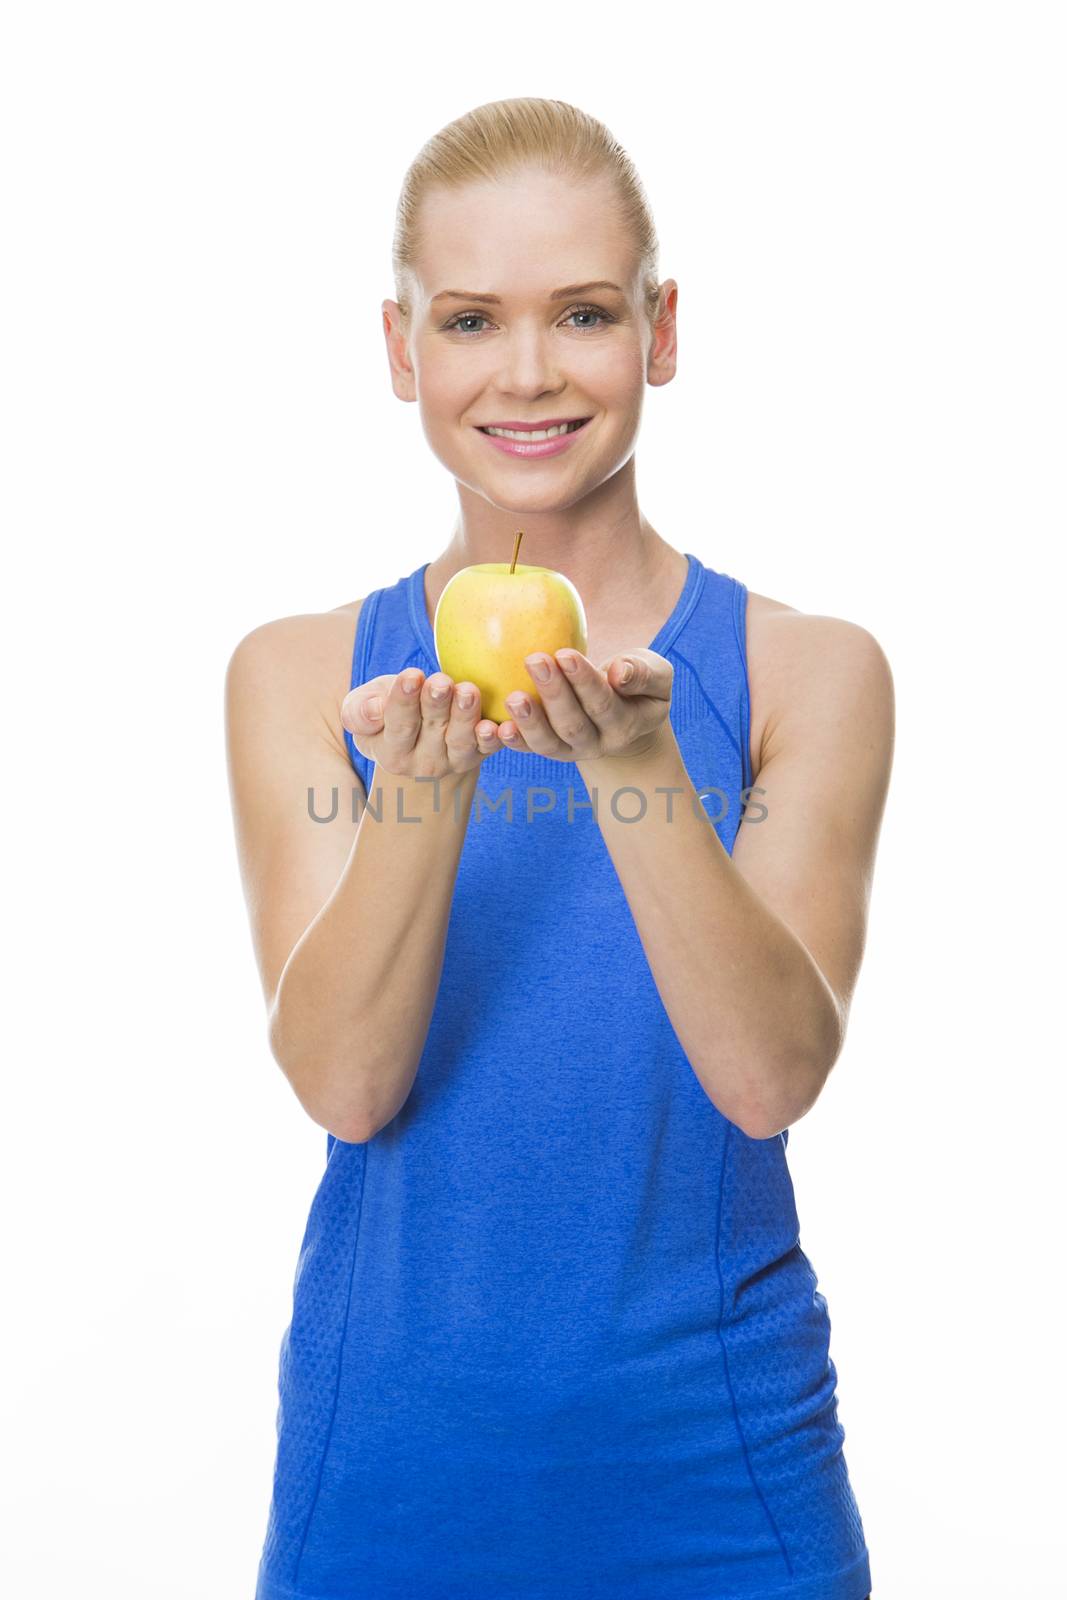 blonde smiling woman wearing fitness clothing and holding an apple with both hands